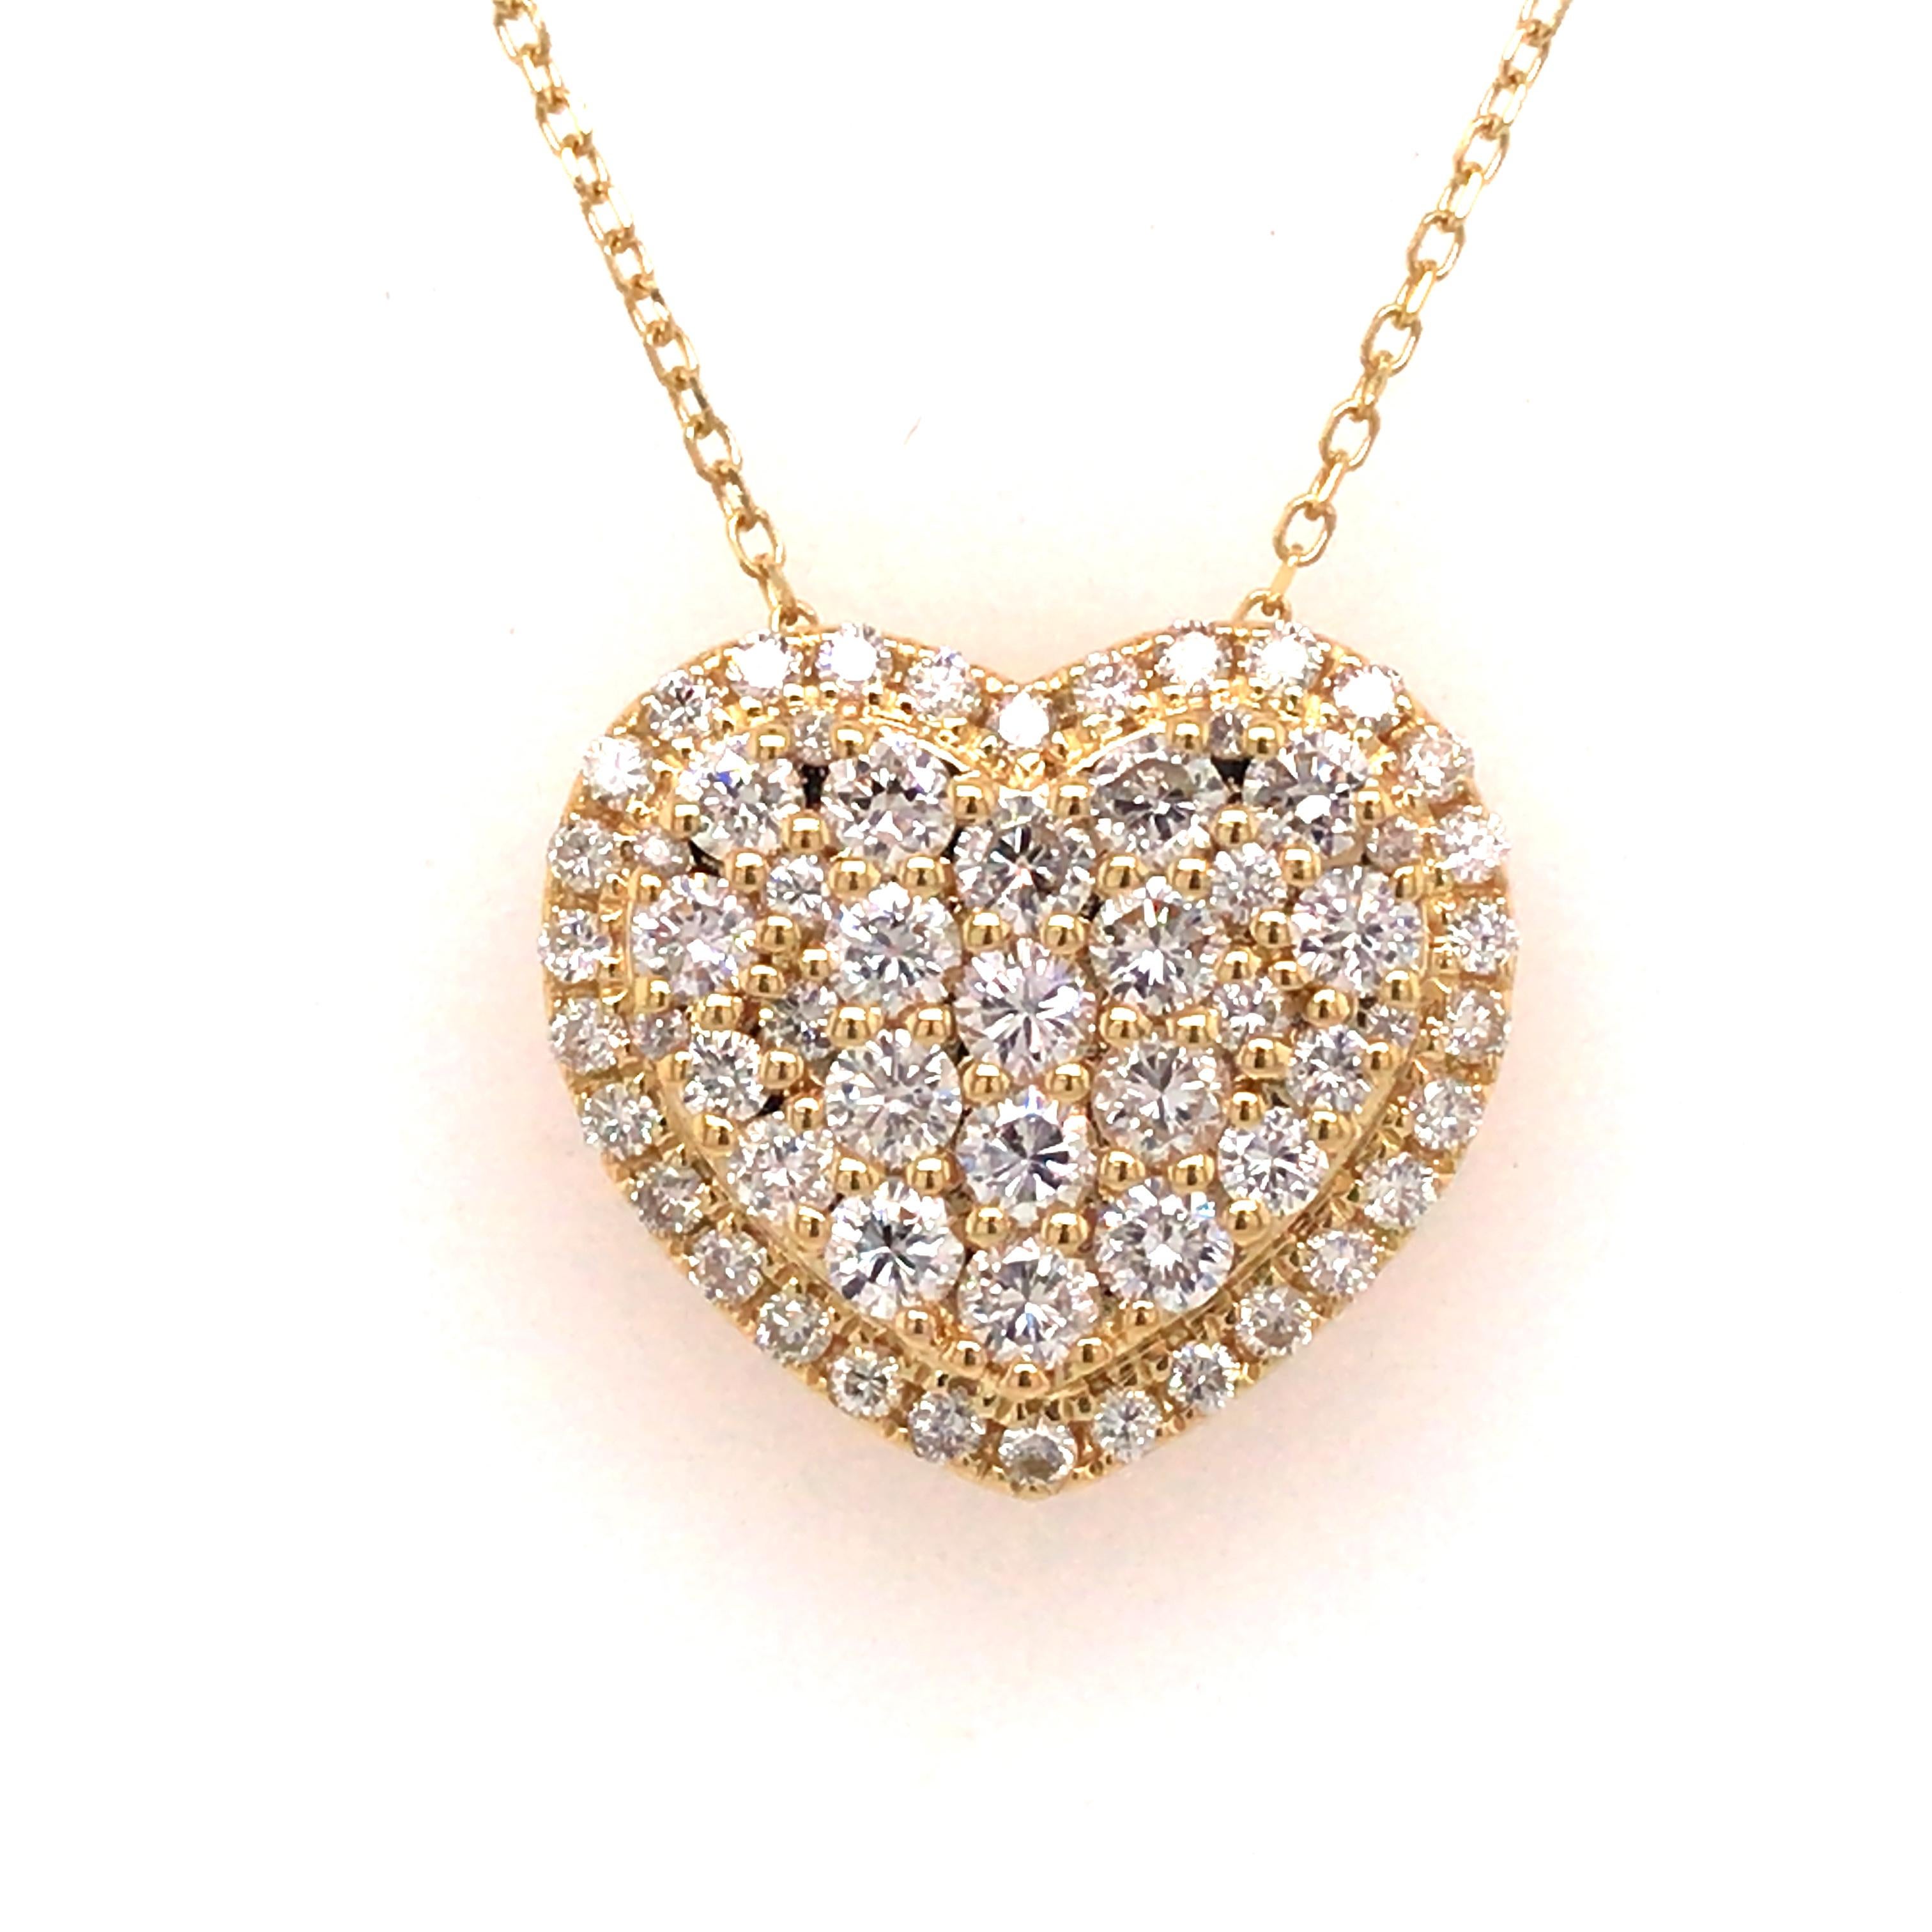 Diamond Heart Cluster Pendant in 18K Yellow Gold. (60) Round Brilliant Cut Diamonds weighing 1.0 carat total weight, G-H in color and VS in clarity are expertly set. The Necklace measures 18 inch in length.